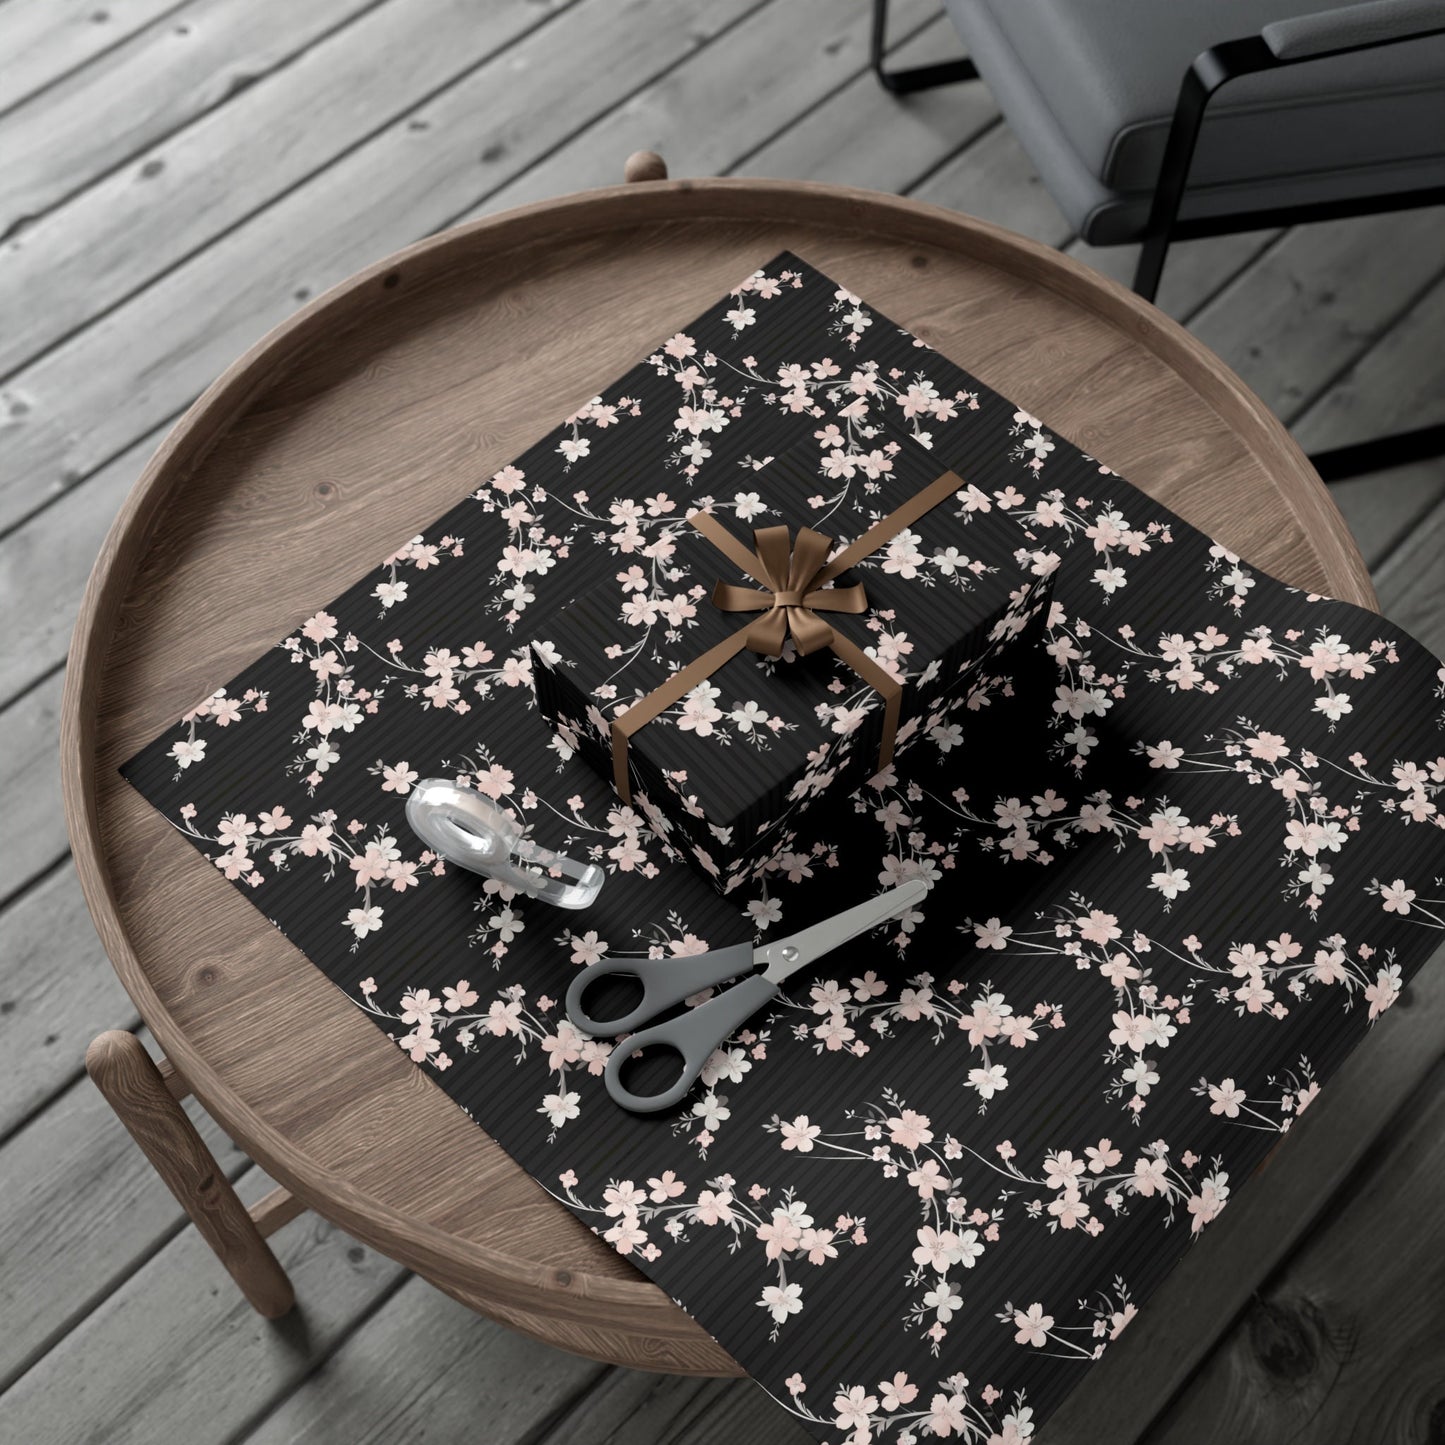 Black Pink Floral Wrapping Paper, Classy Elegant Birthday Gift Wrap Paper, Present Paper Roll for Her